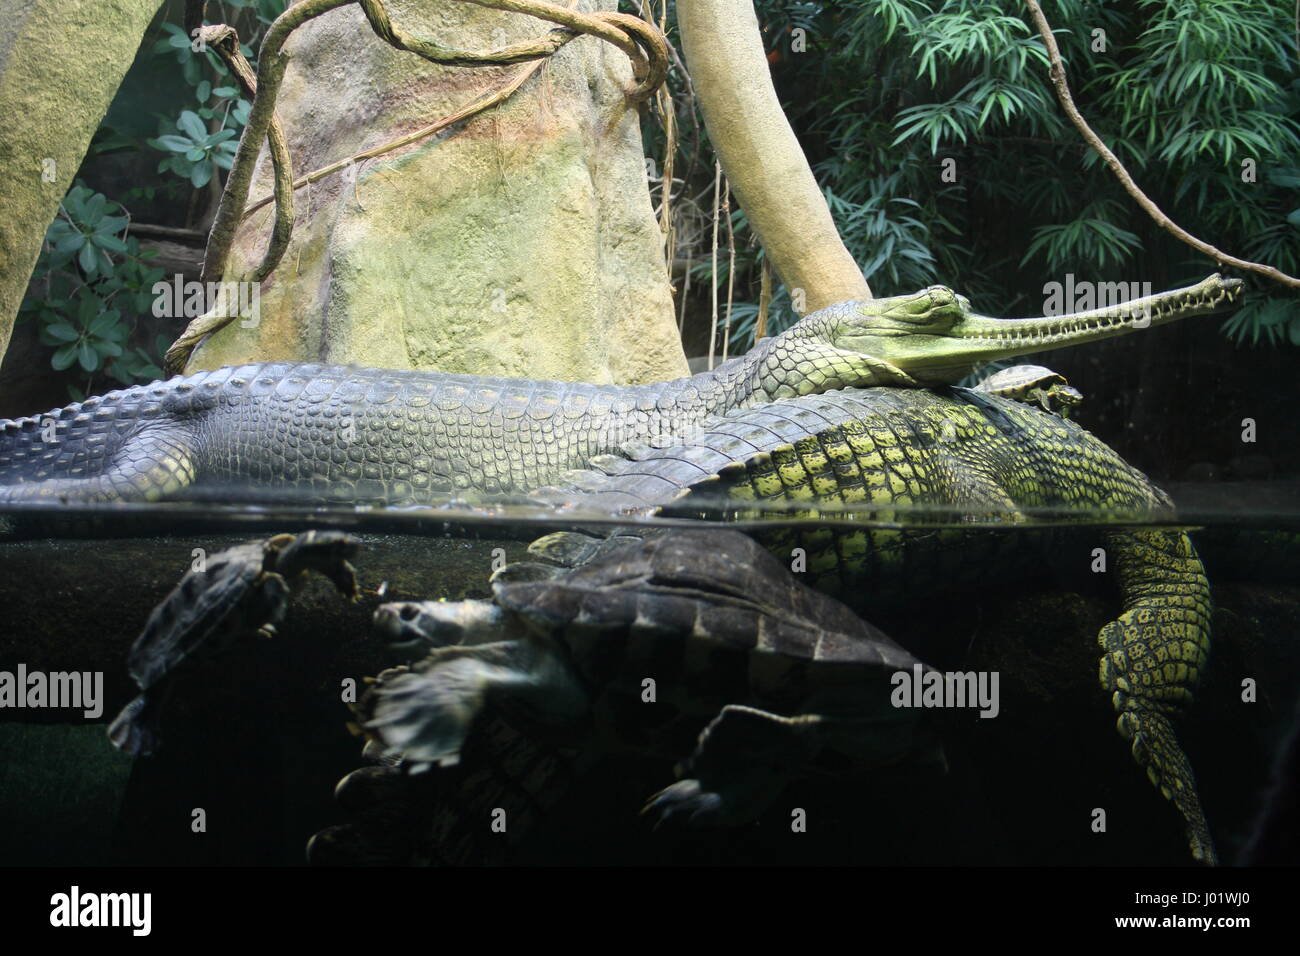 Gharial (Gavialis gangeticus), also knows as the gavial or fish-eating crocodile. Prague Zoo, Czech Republic Stock Photo